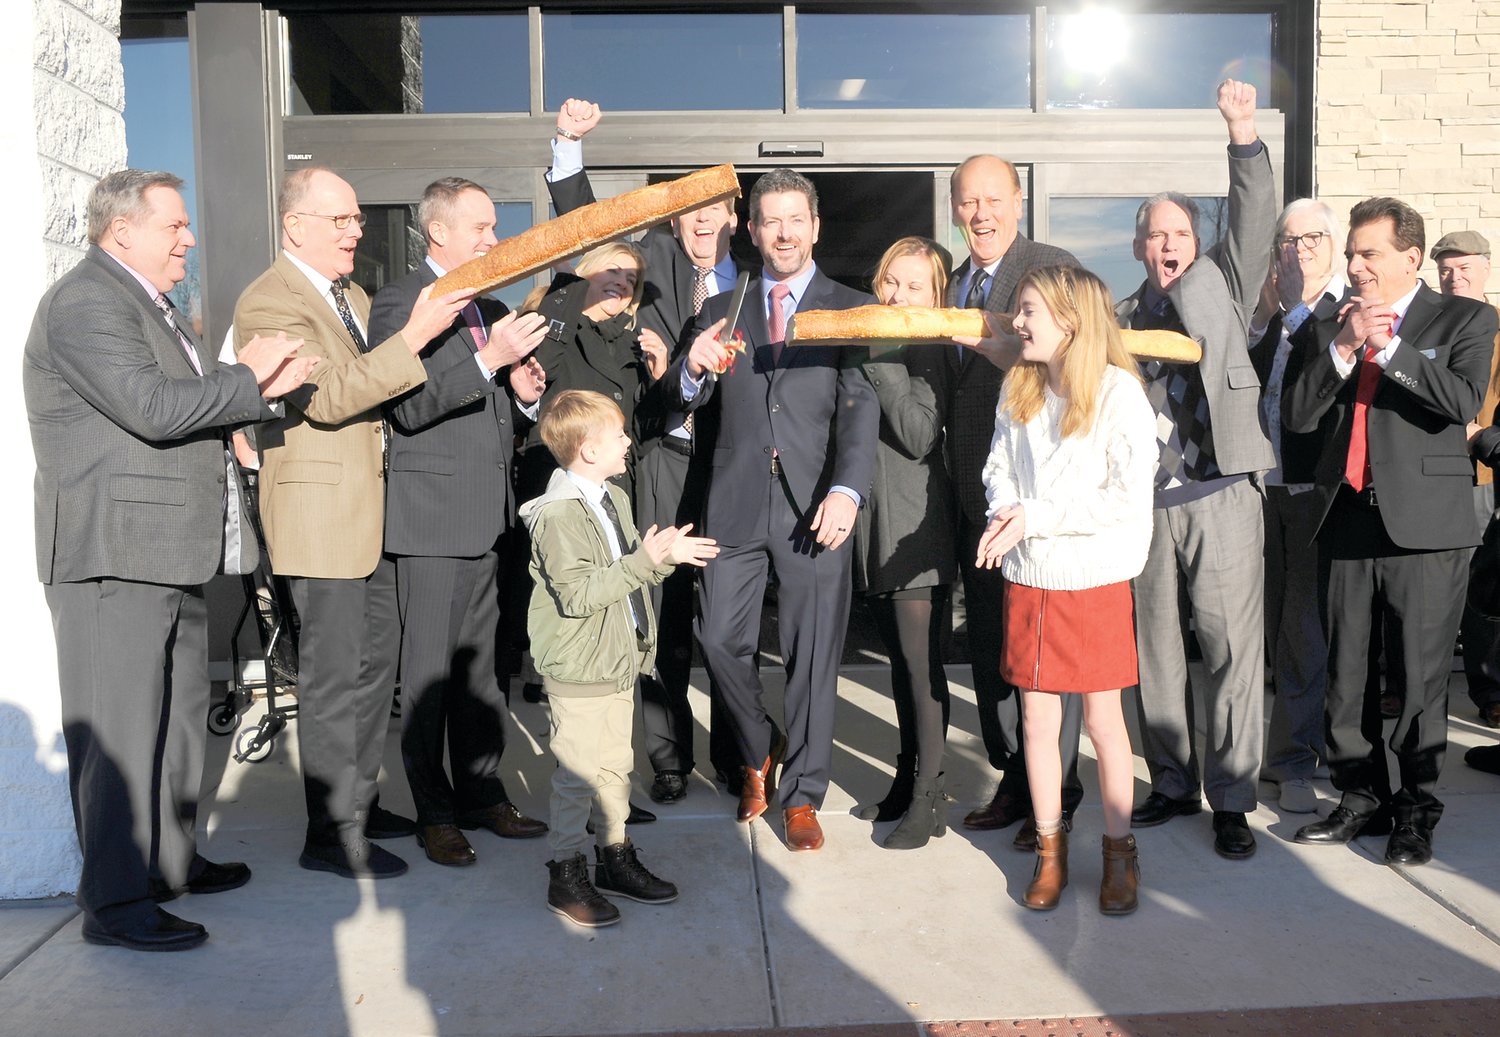 Participating in the “bread cutting” for McCaffrey’s Food Markets’ New Hope store are Thomas Tilley, human resources director; Fred Brohm, COO; state Sen. Steven Santarsiero; Lisa McCaffrey,  James McCaffrey V, James McCaffrey IV, James McCaffrey III, Maggie McCaffrey, New Hope Mayor Larry Keller, Grace McCaffrey, Mike Esbensen, assistant store manager; Maryann Vernon, director of store operations; and Lou Campo, store manager. Photograph by Carol Ross.